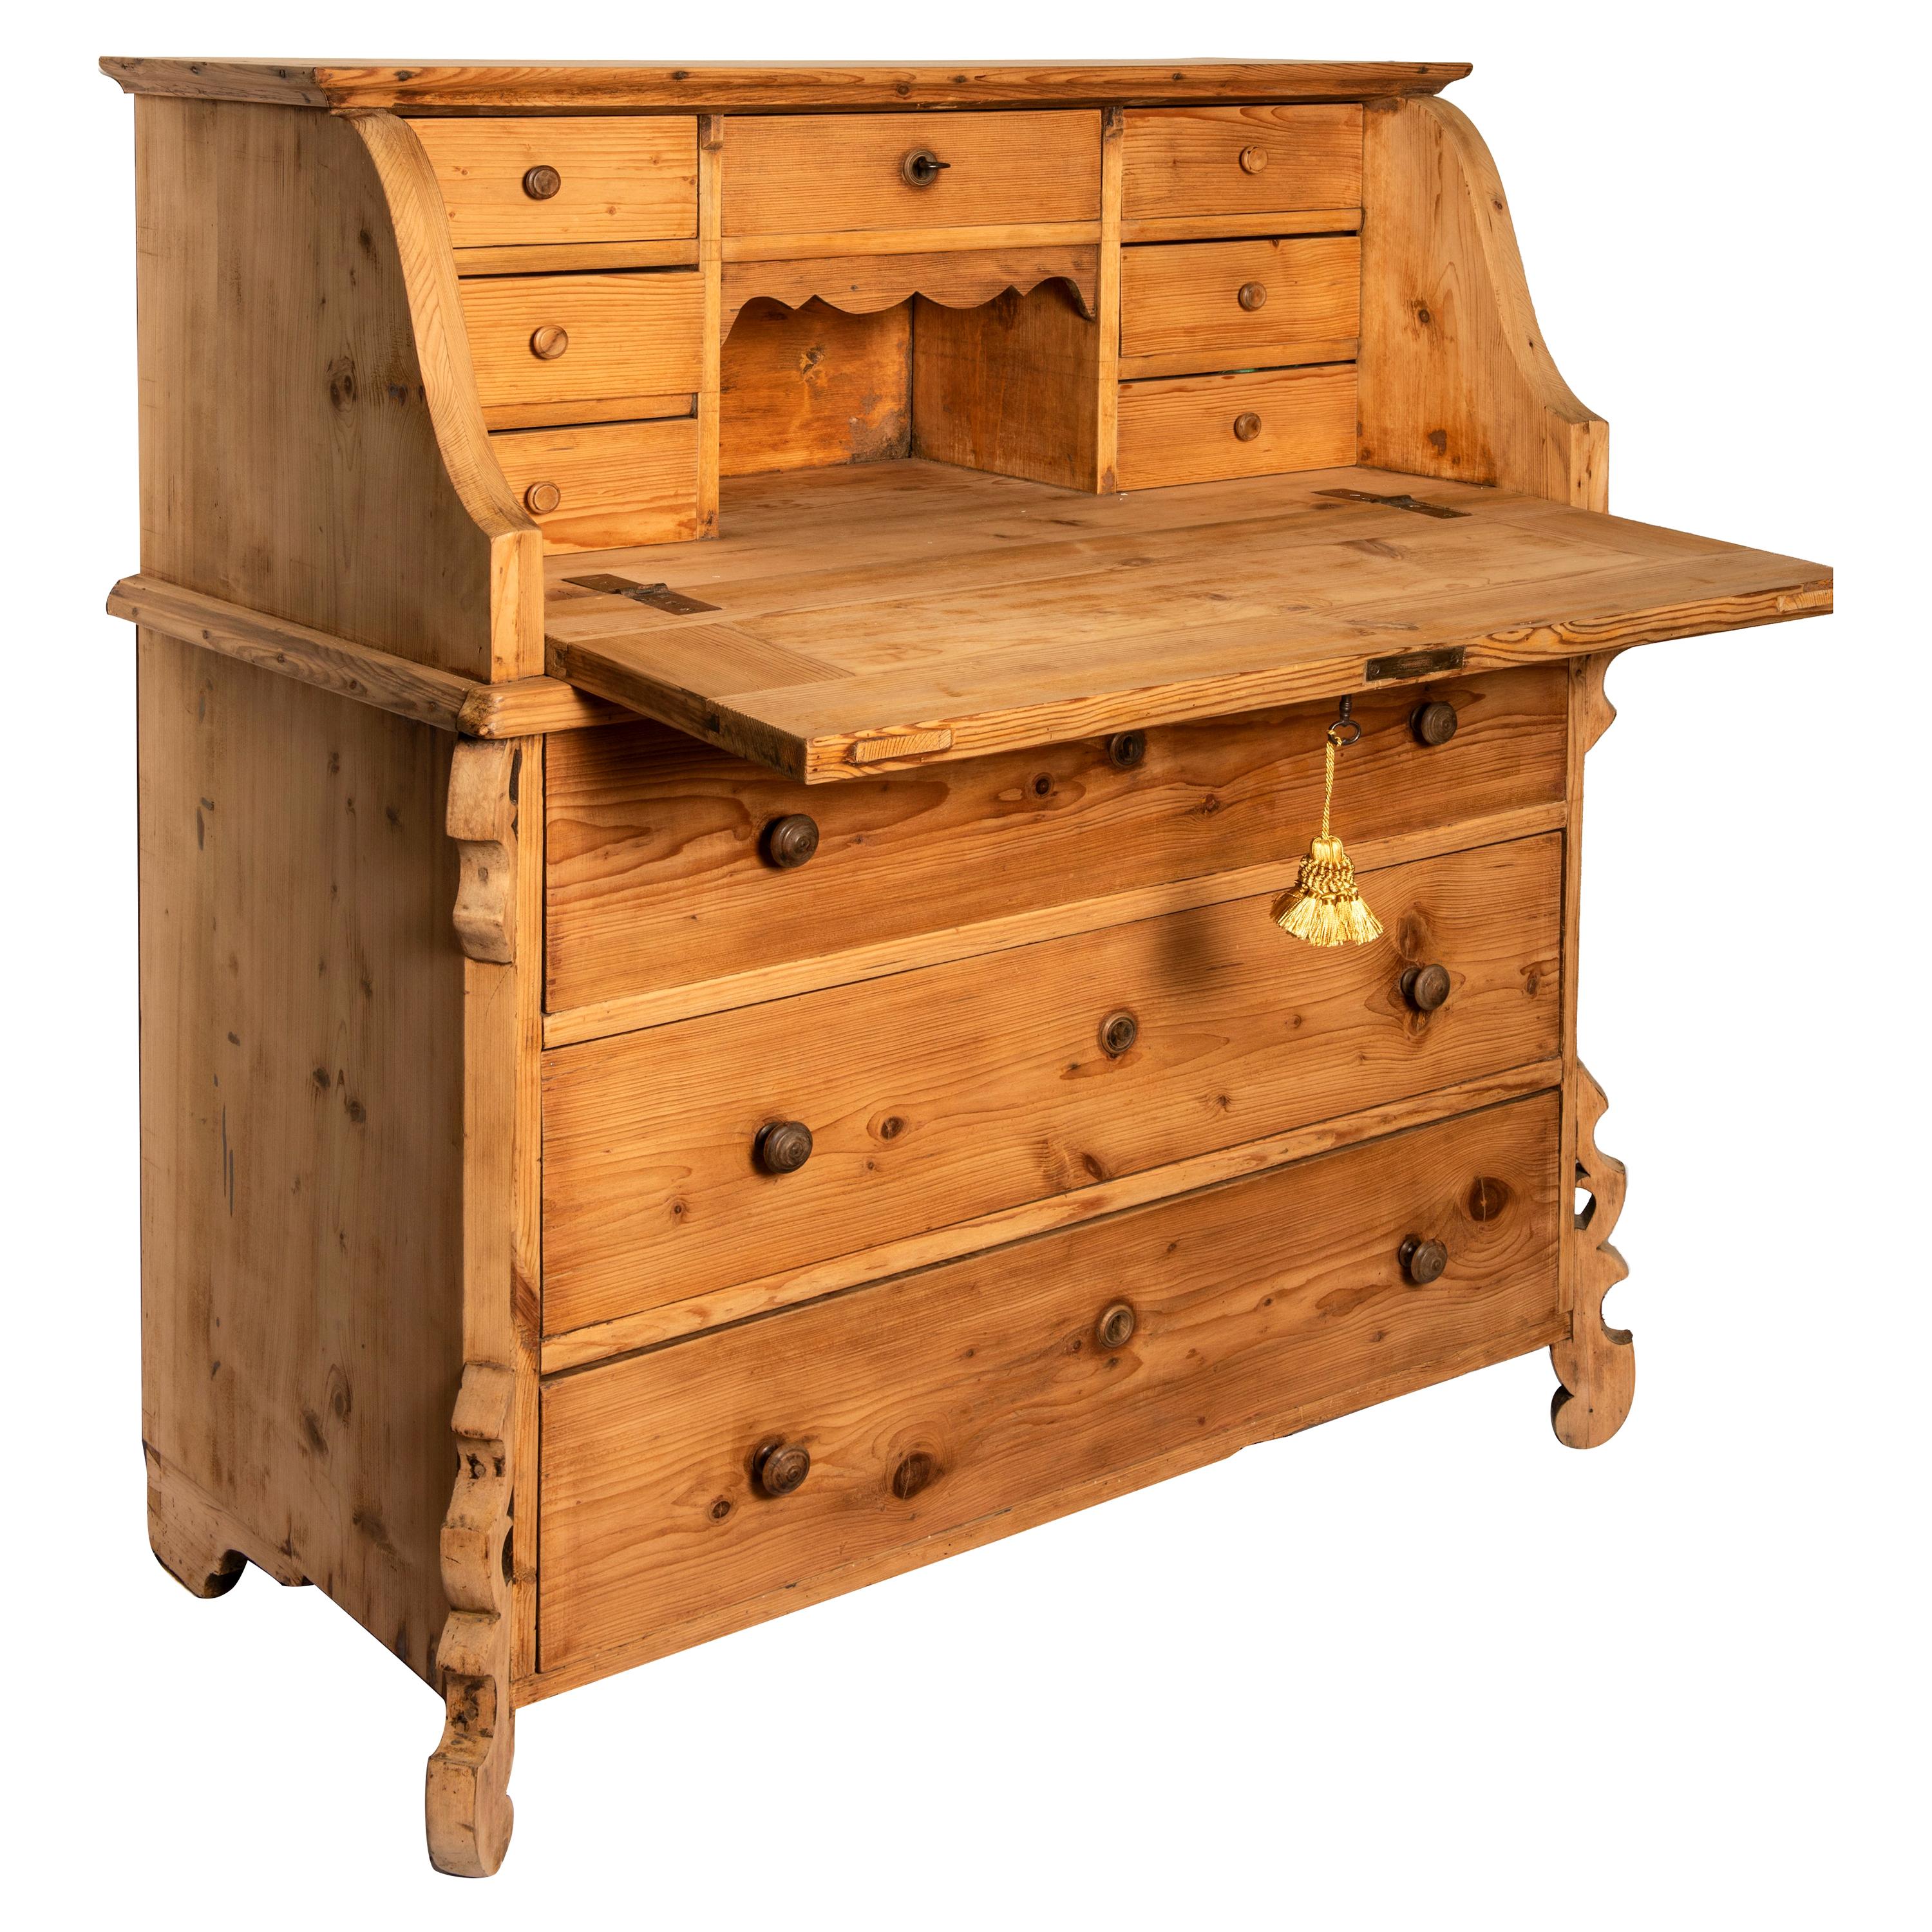 19th Century Louis Philippe Larch Drop-Front Bureau from Italian Alps Mountains